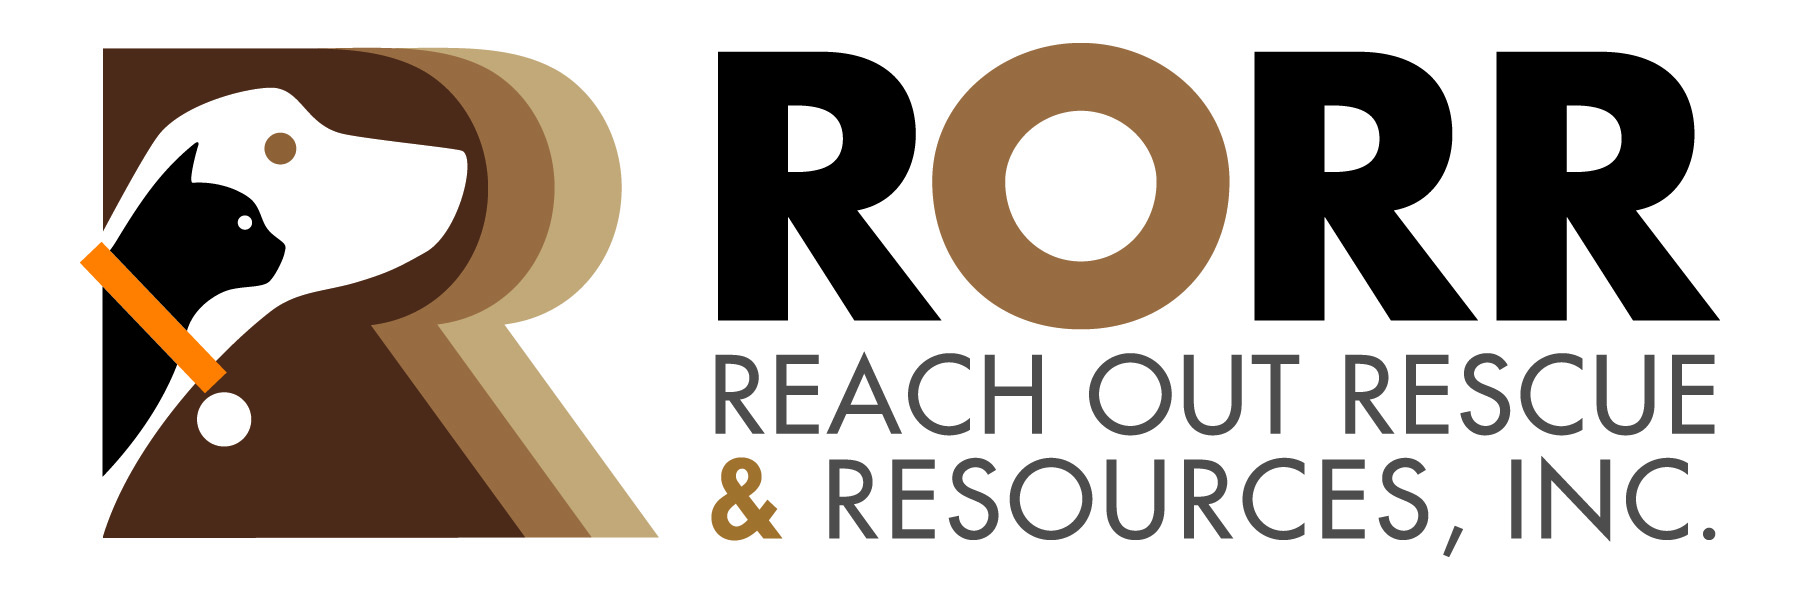 Reach Out Rescue & Resources